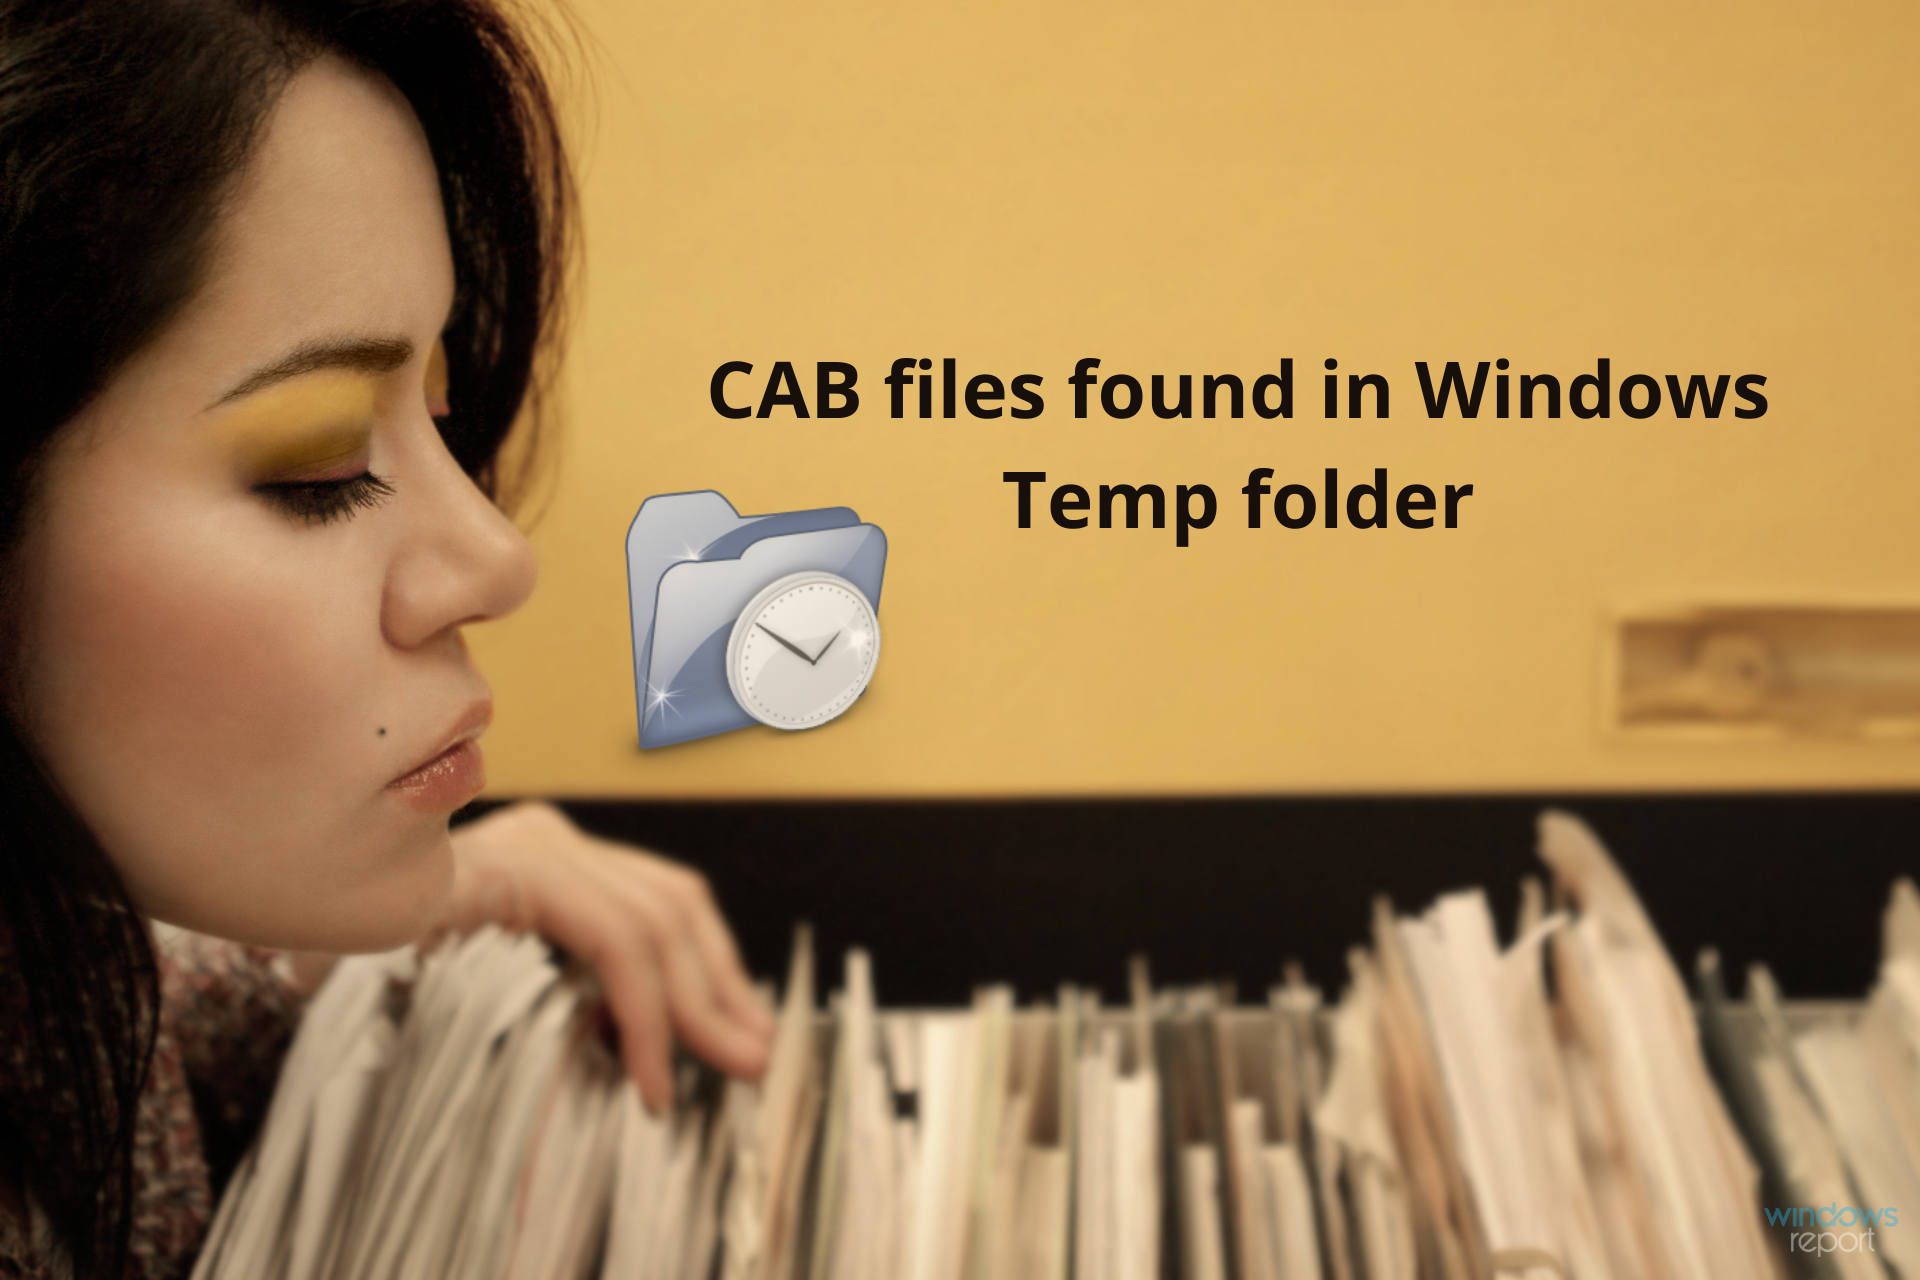 how to delete cab files in temp folder with cmd